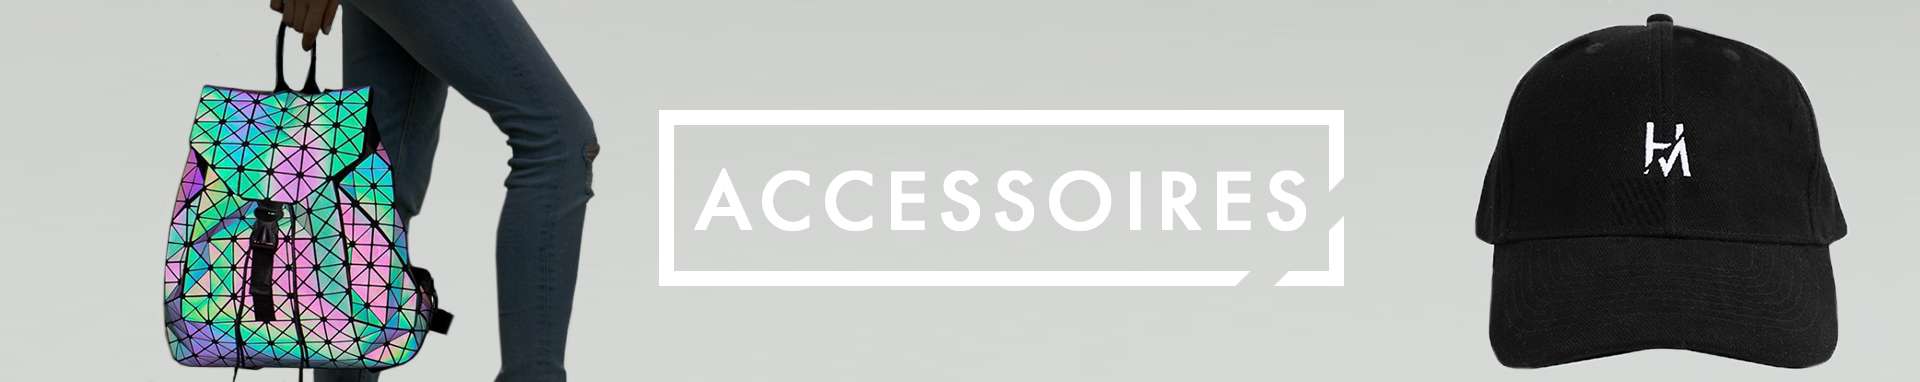 Holycollection/Accessoires